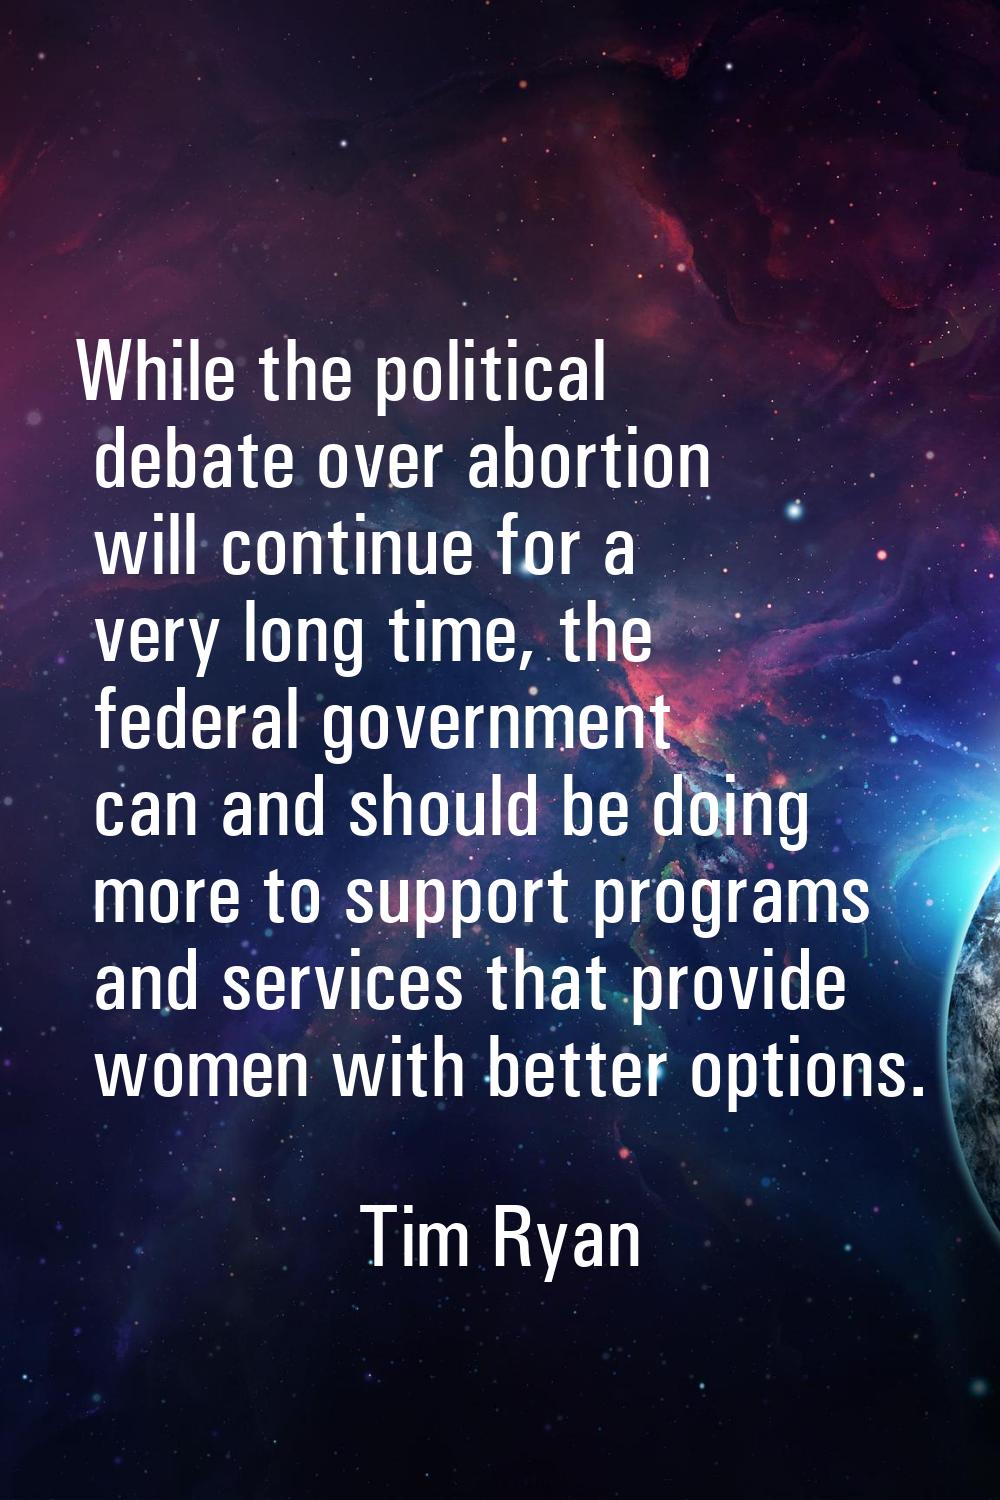 While the political debate over abortion will continue for a very long time, the federal government